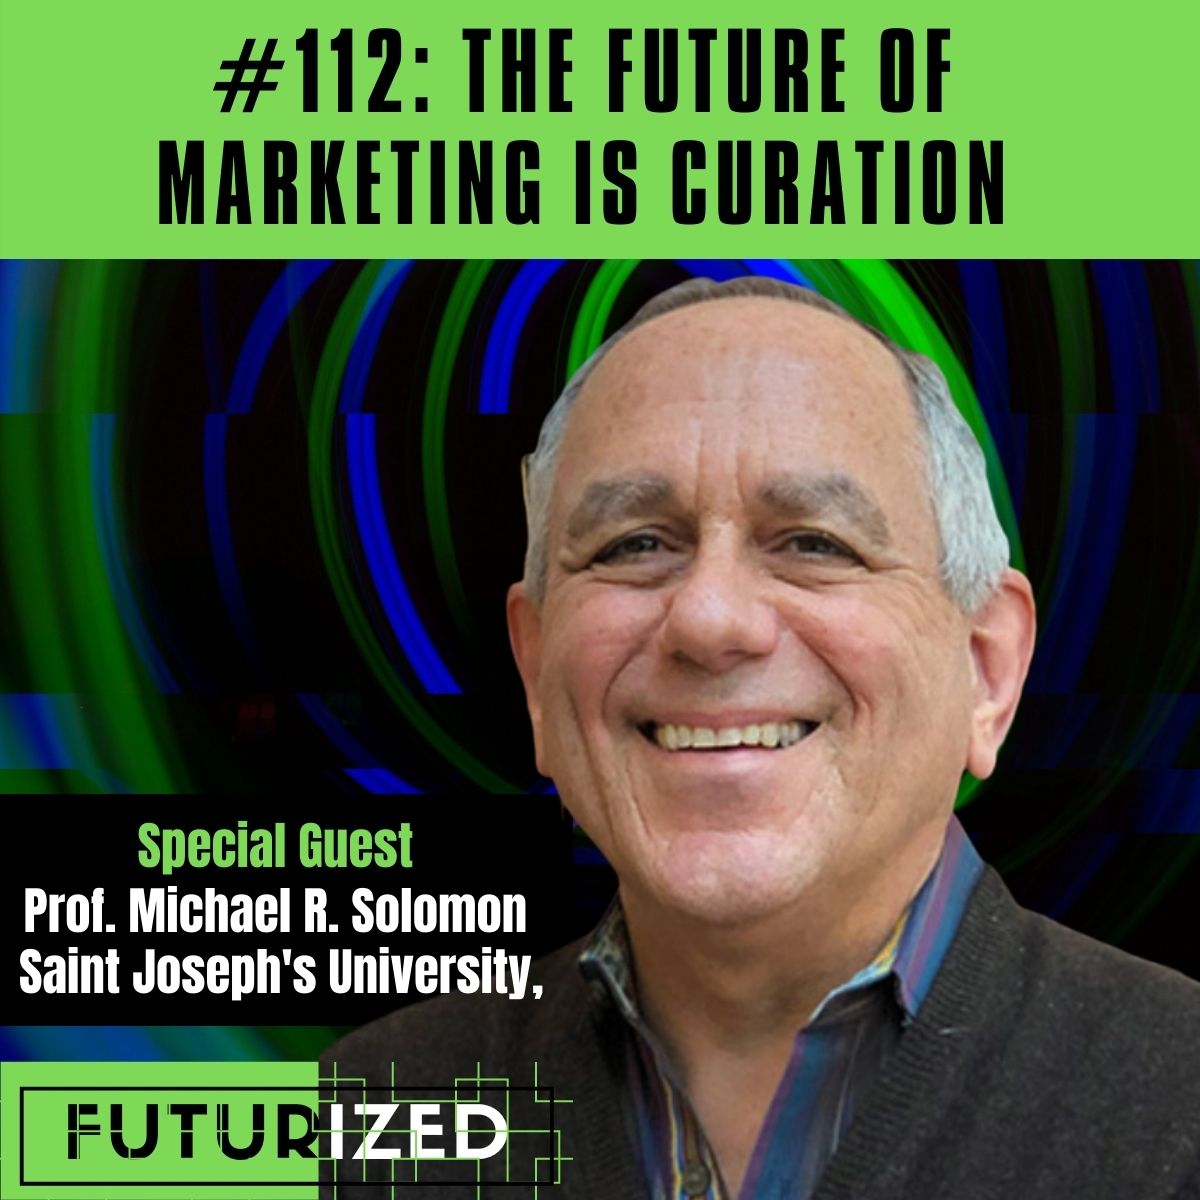 The Future of Marketing is Curation Image